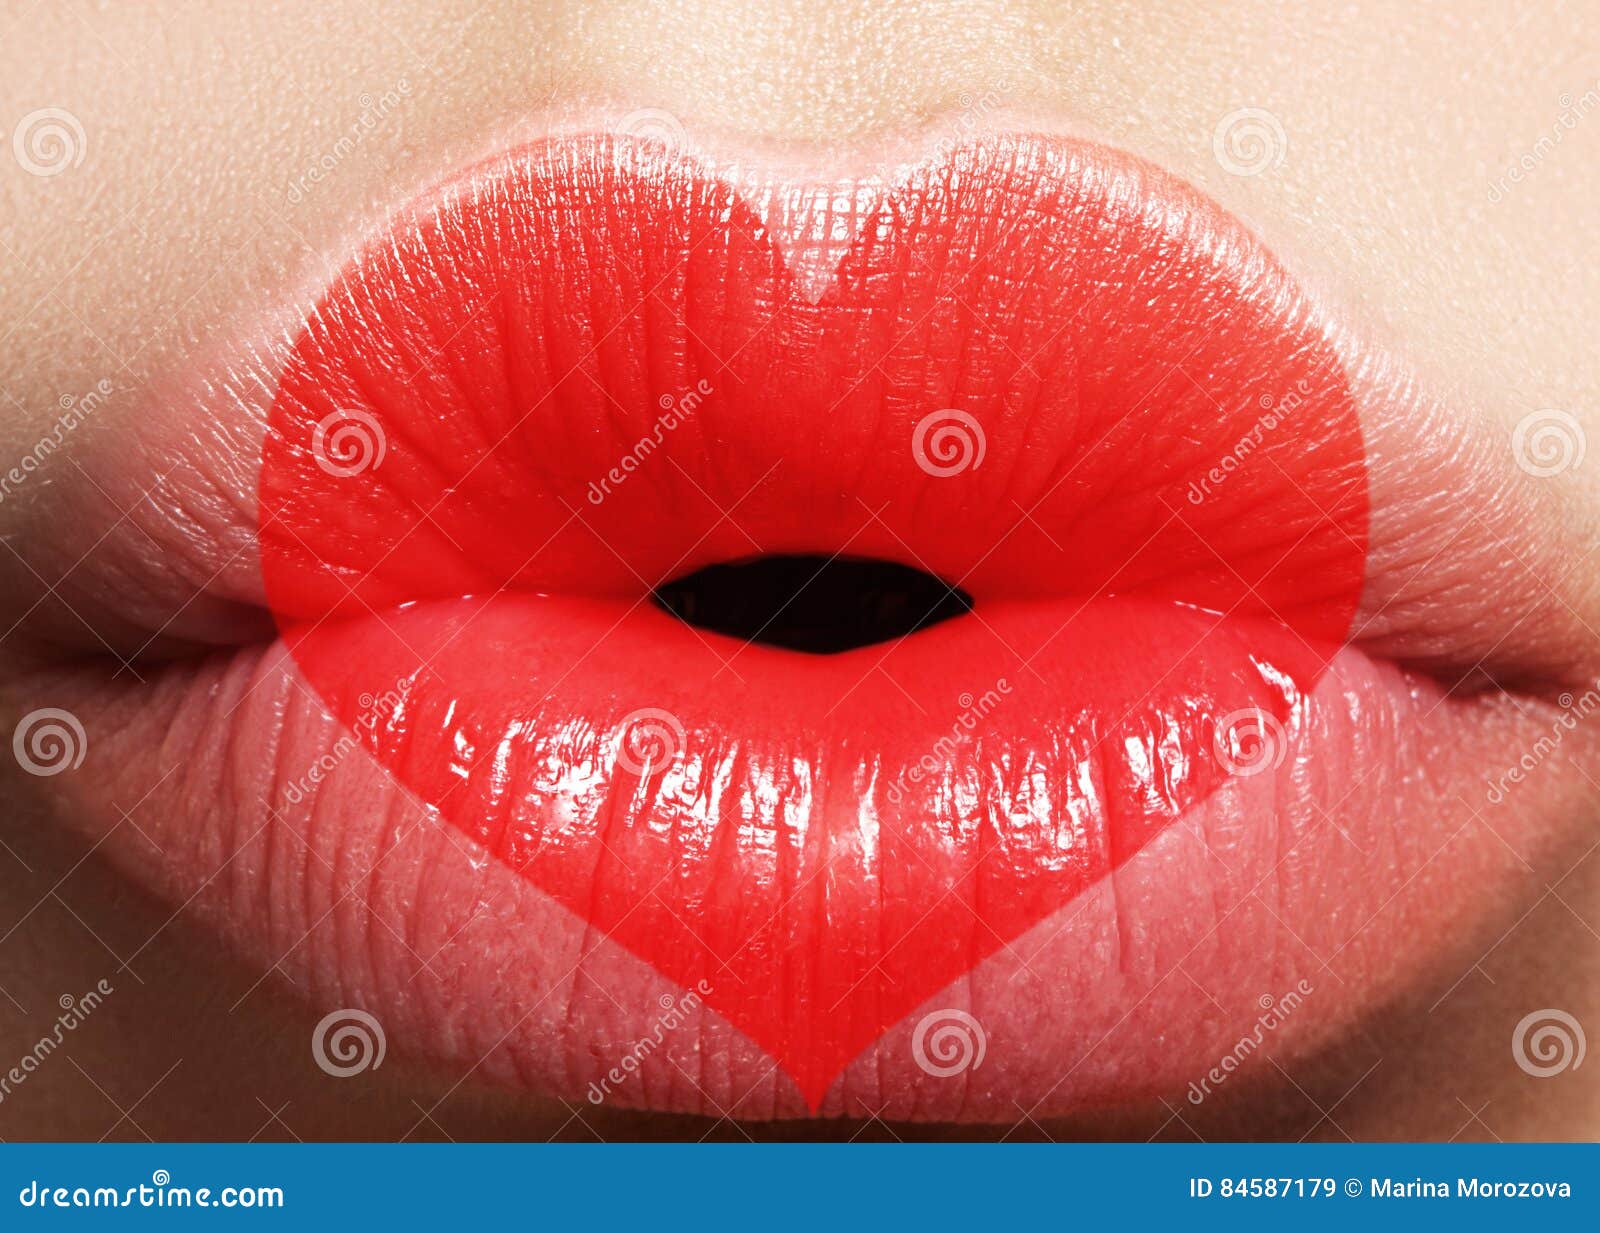 True Love Lips Meaning Real Love And Commitment Stock Photo, Picture and  Royalty Free Image. Image 71769020.